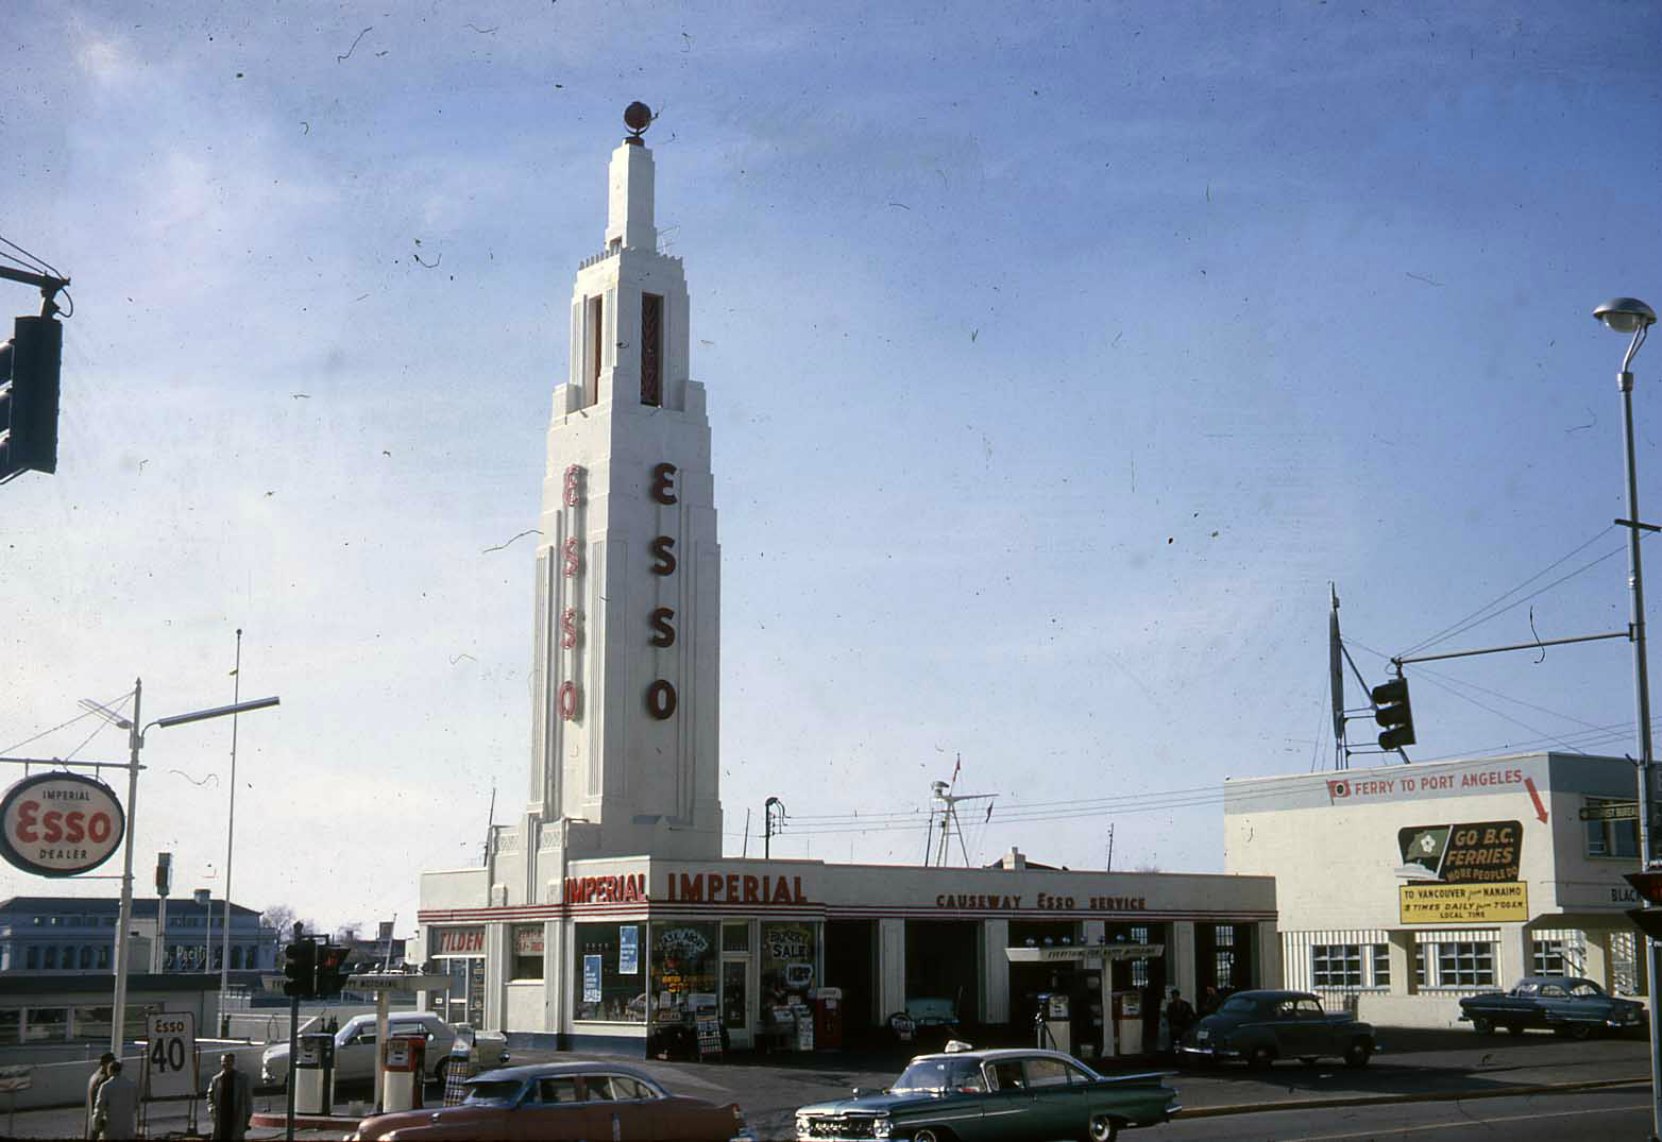 812 Wharf Street as an ESSO station, circa 1960 (photo courtesy of Glenbow Museum, used with permission)